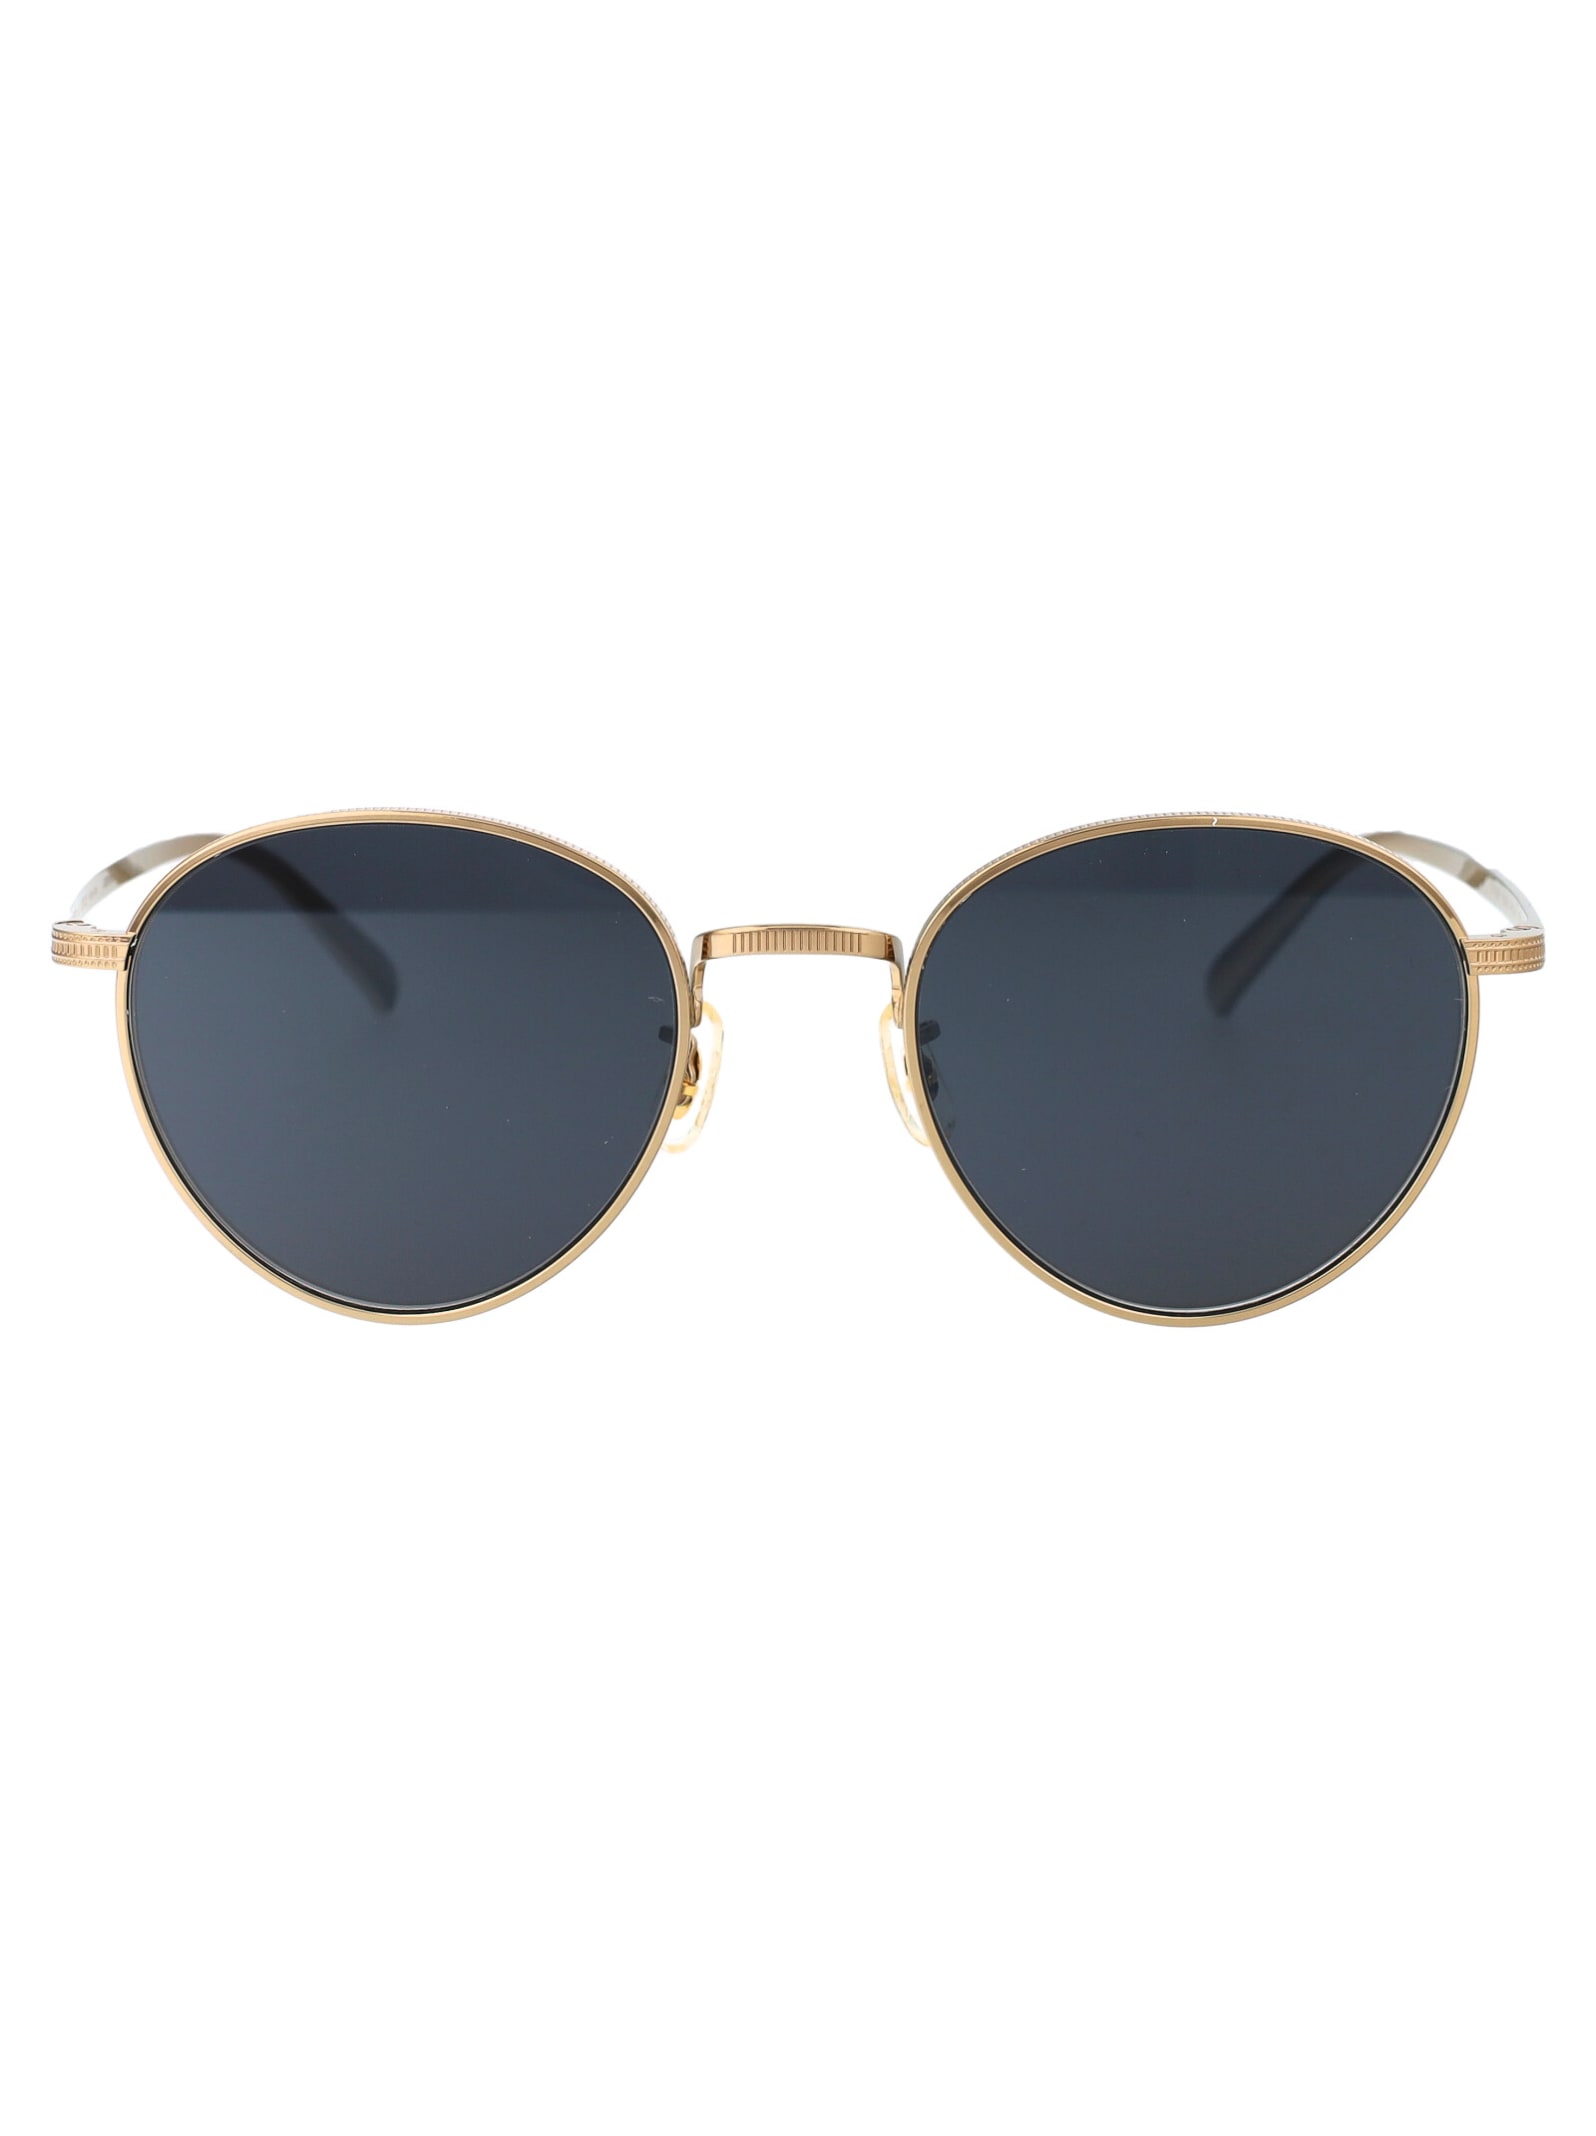 Shop Oliver Peoples Rhydian Sunglasses In 5035r5 Gold